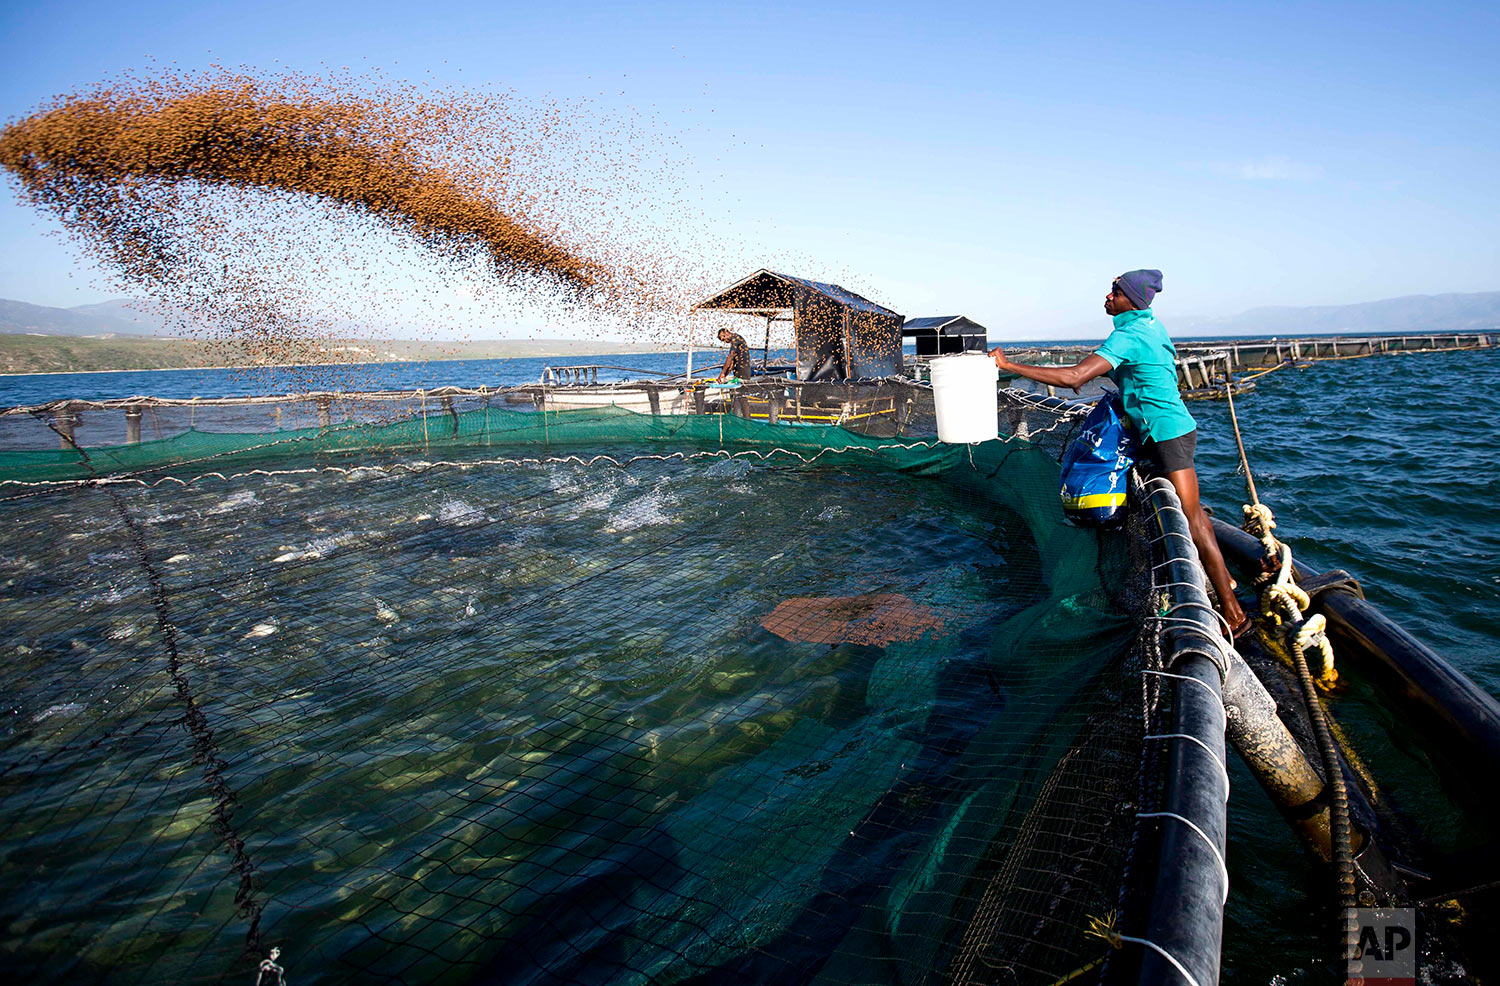  In this April 17, 2018 photo, a Taino Aqua Fish worker throws food to tilapia fish being grown within a netted area in Lake Azuei Fond in Parisien, Haiti. Hatchlings are raised on a vegetable-based feed and are ready to sell after four months. (AP P